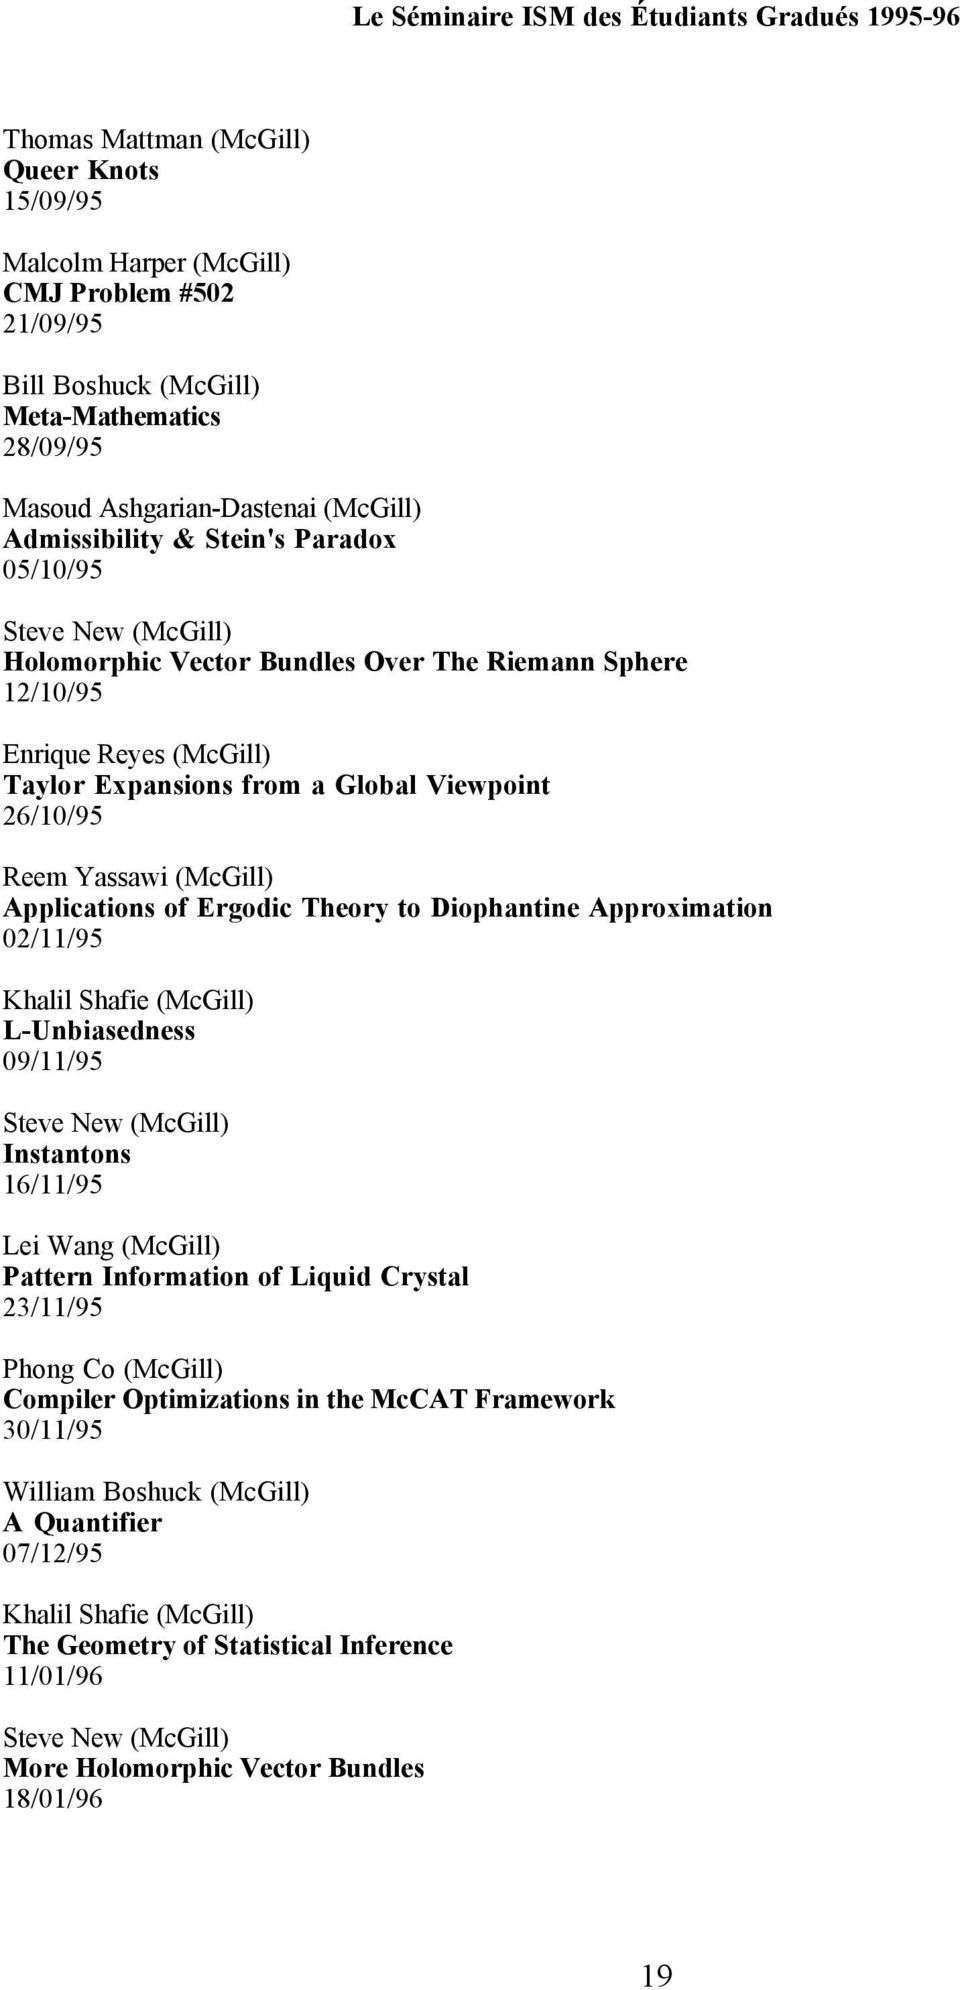 Global Viewpoint 26/10/95 Reem Yassawi (McGill) Applications of Ergodic Theory to Diophantine Approximation 02/11/95 Khalil Shafie (McGill) L-Unbiasedness 09/11/95 Steve New (McGill) Instantons